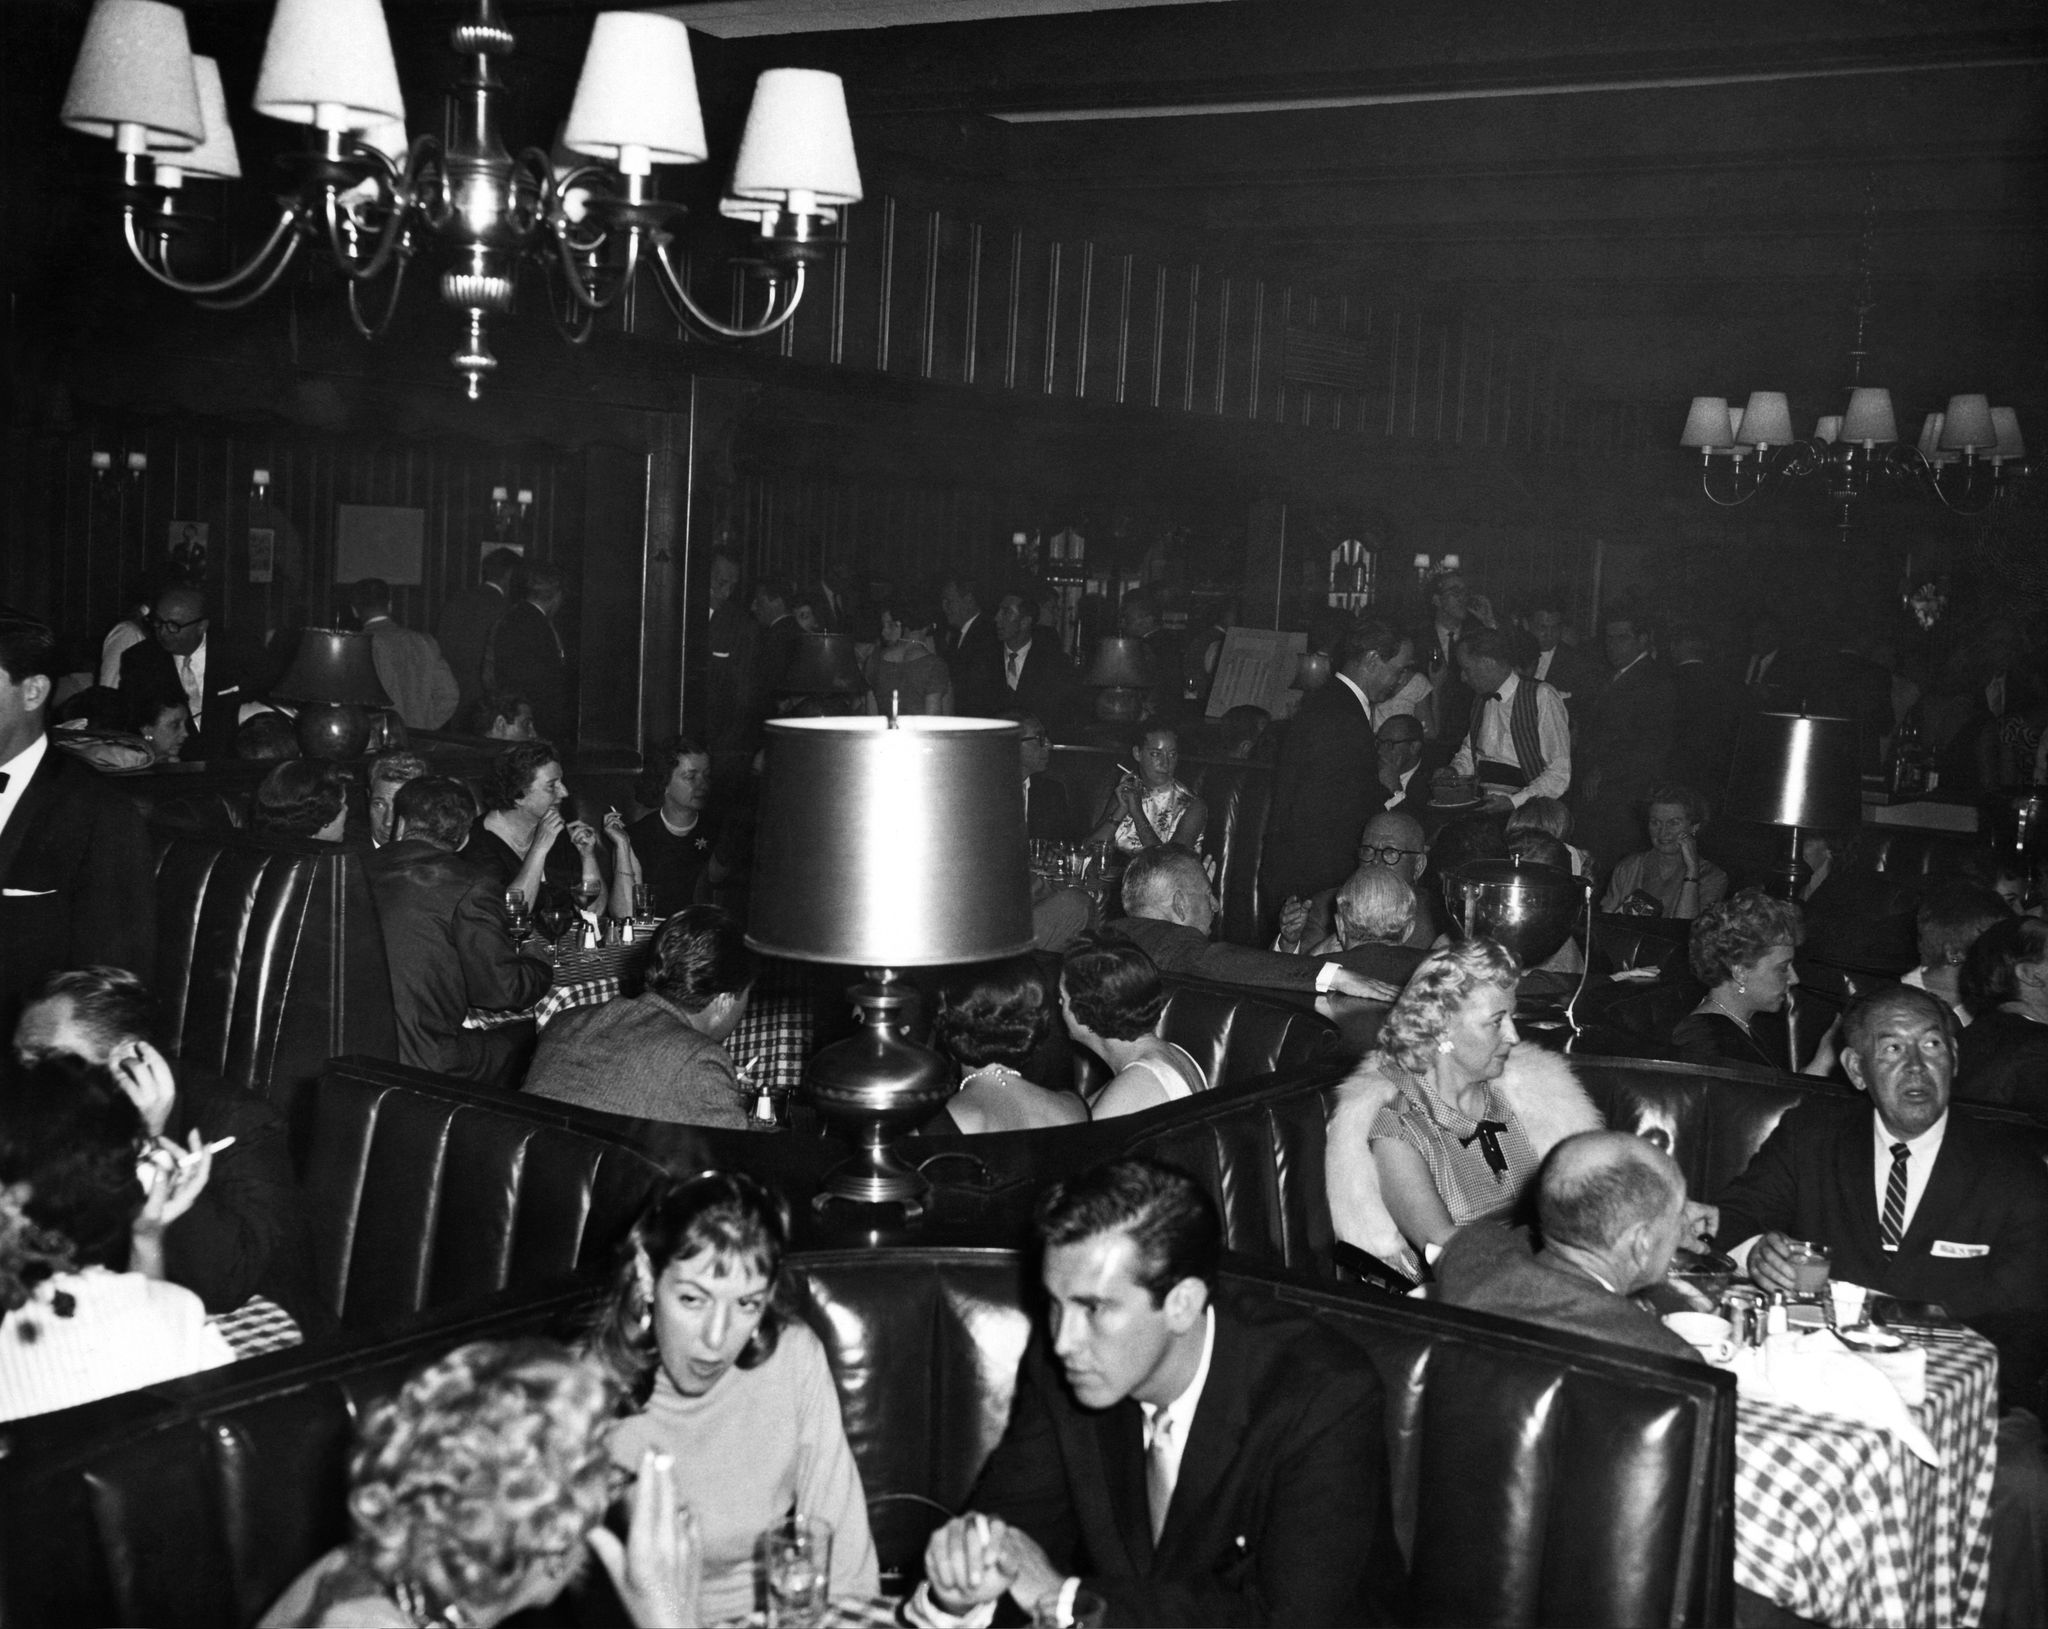 dinner time at chasen's restaurant on beverly blvd in west hollywood hollywood, california c 1960photo by underwood archivesgetty images